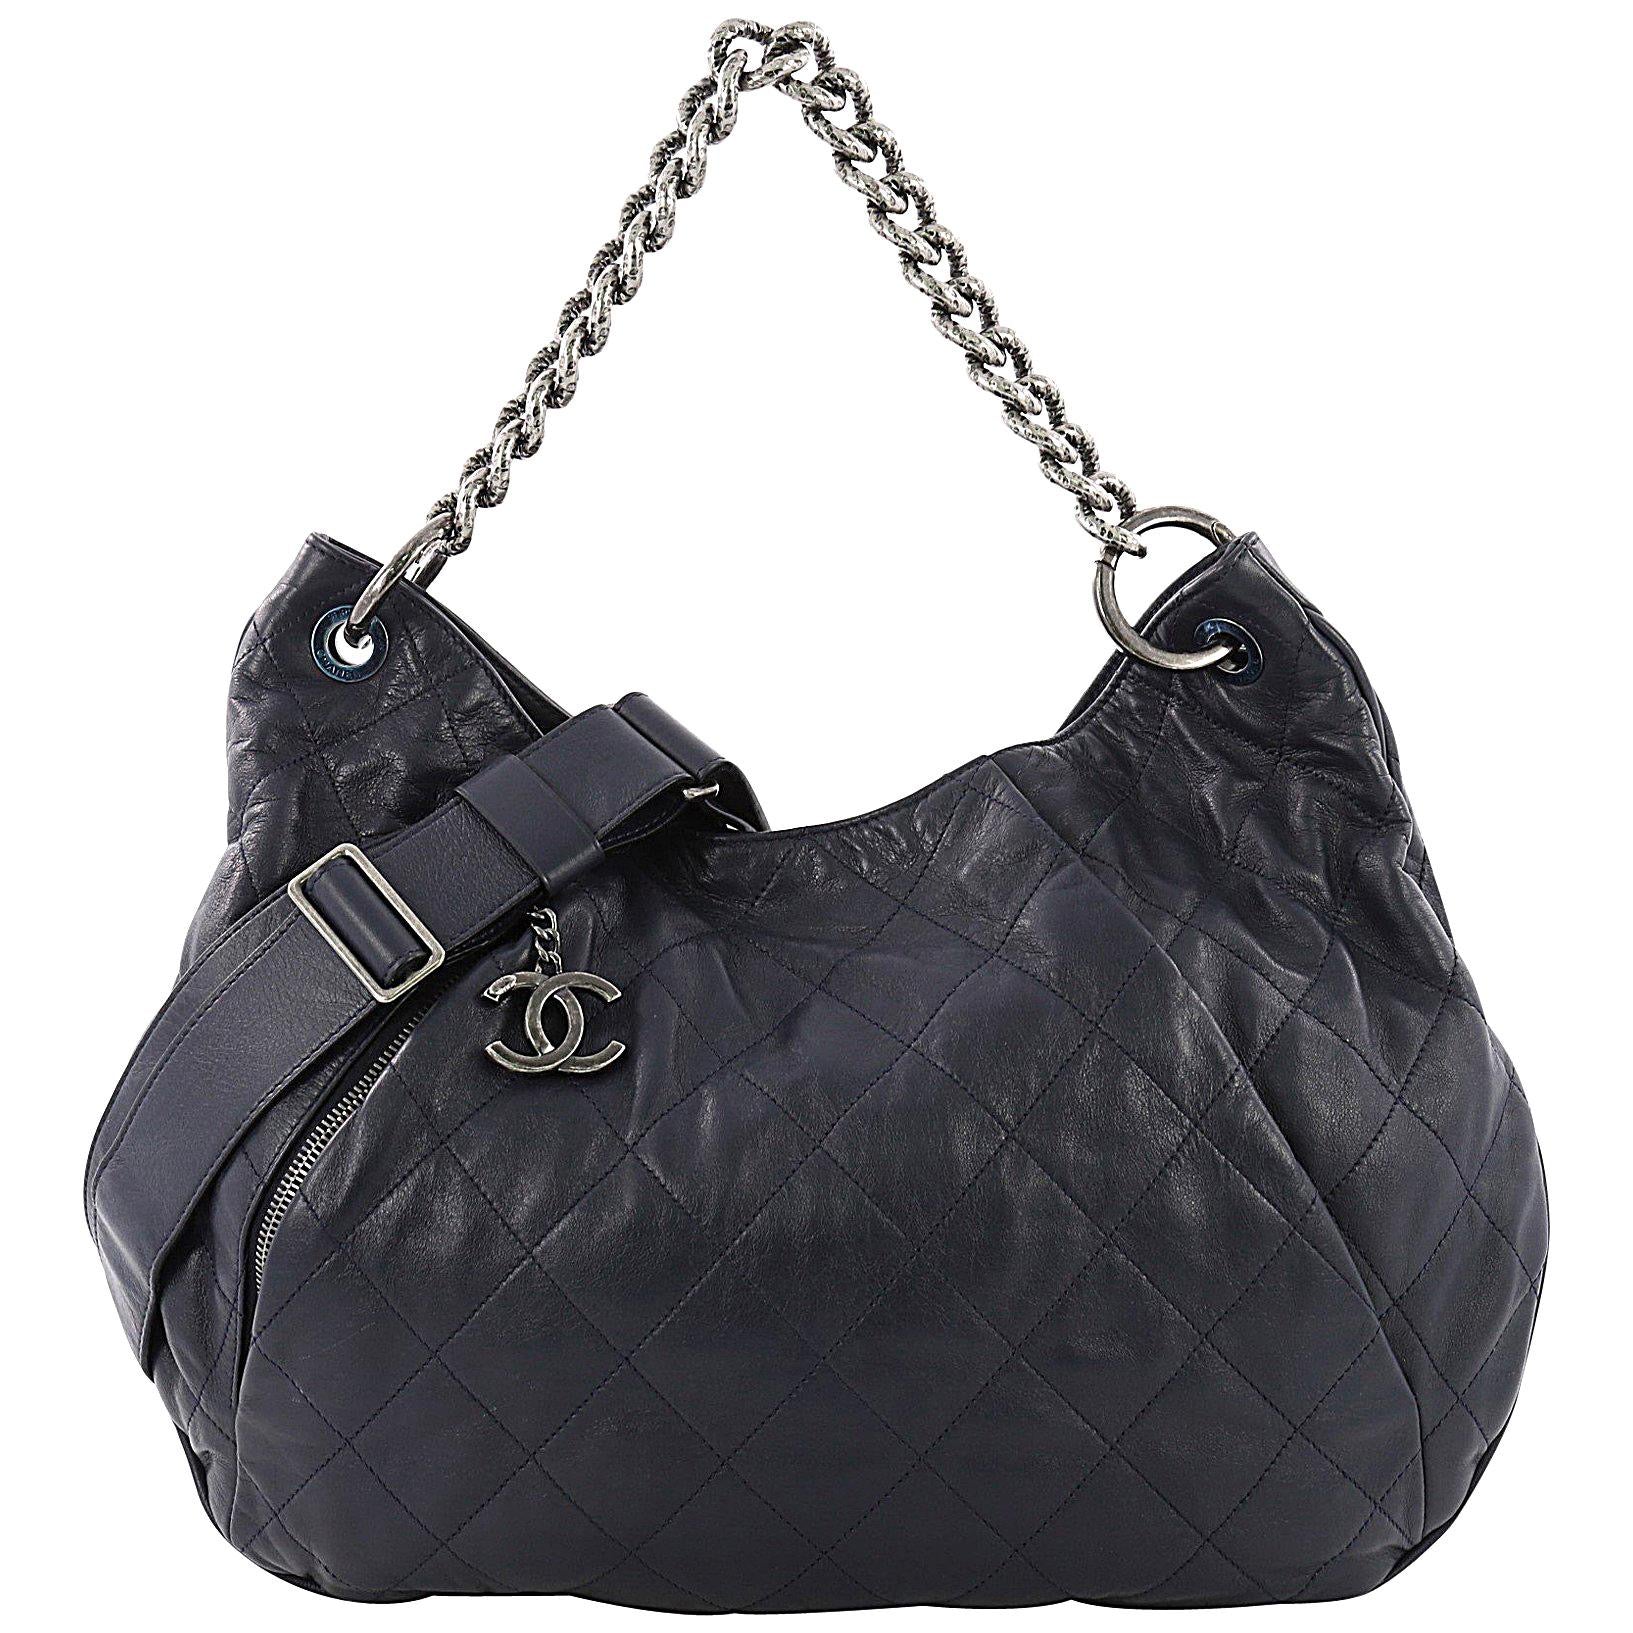 CHANEL COCO PLEATS QUILTED CALFSKIN LARGE HOBO BAG